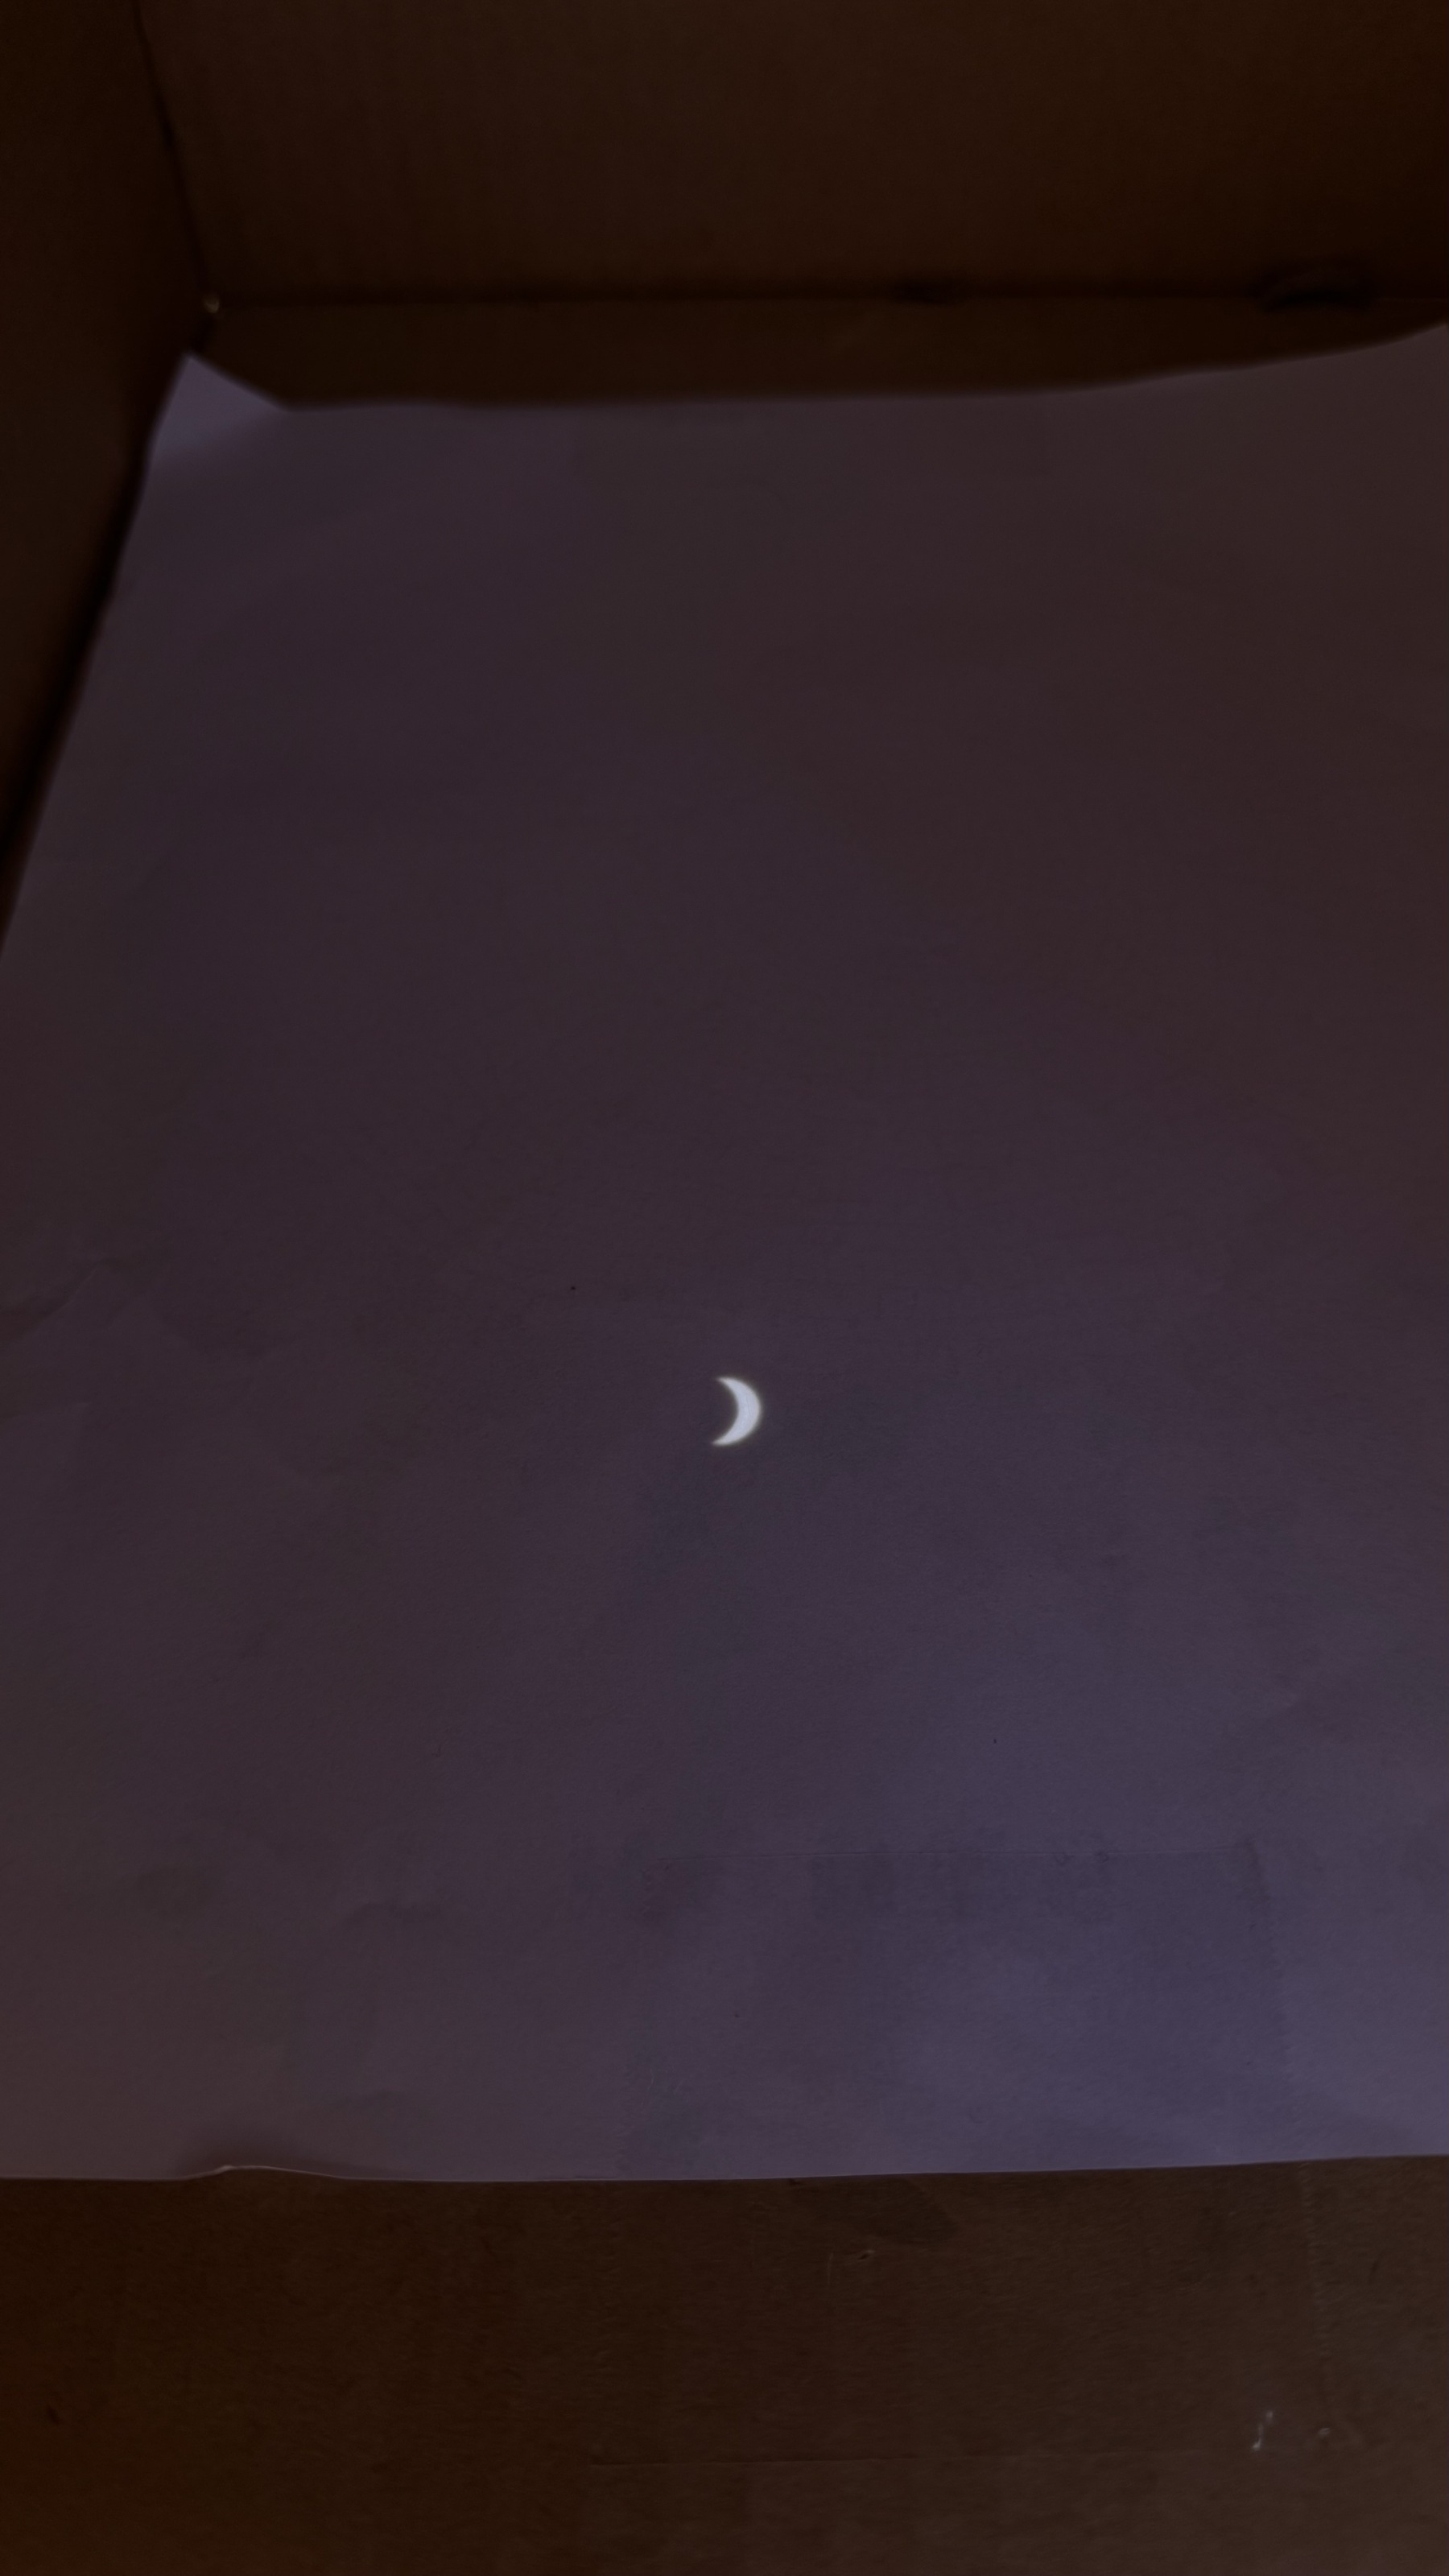 projection of the eclipse from my pinhole projector.